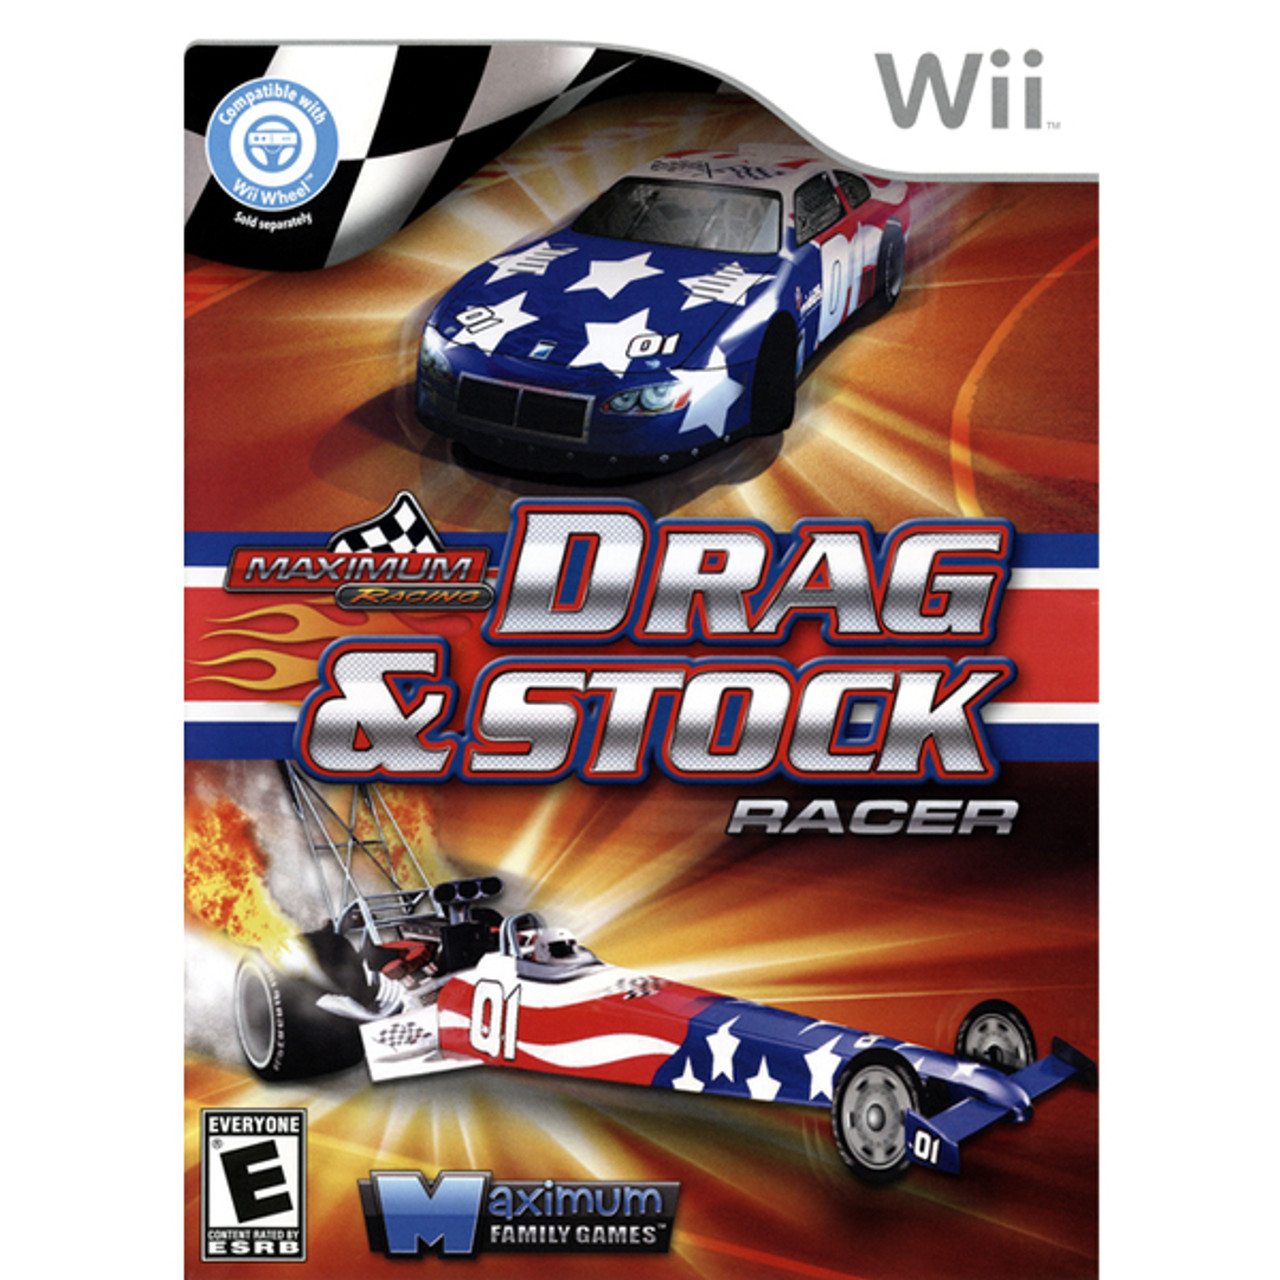 Dirt 2, Wii game Used